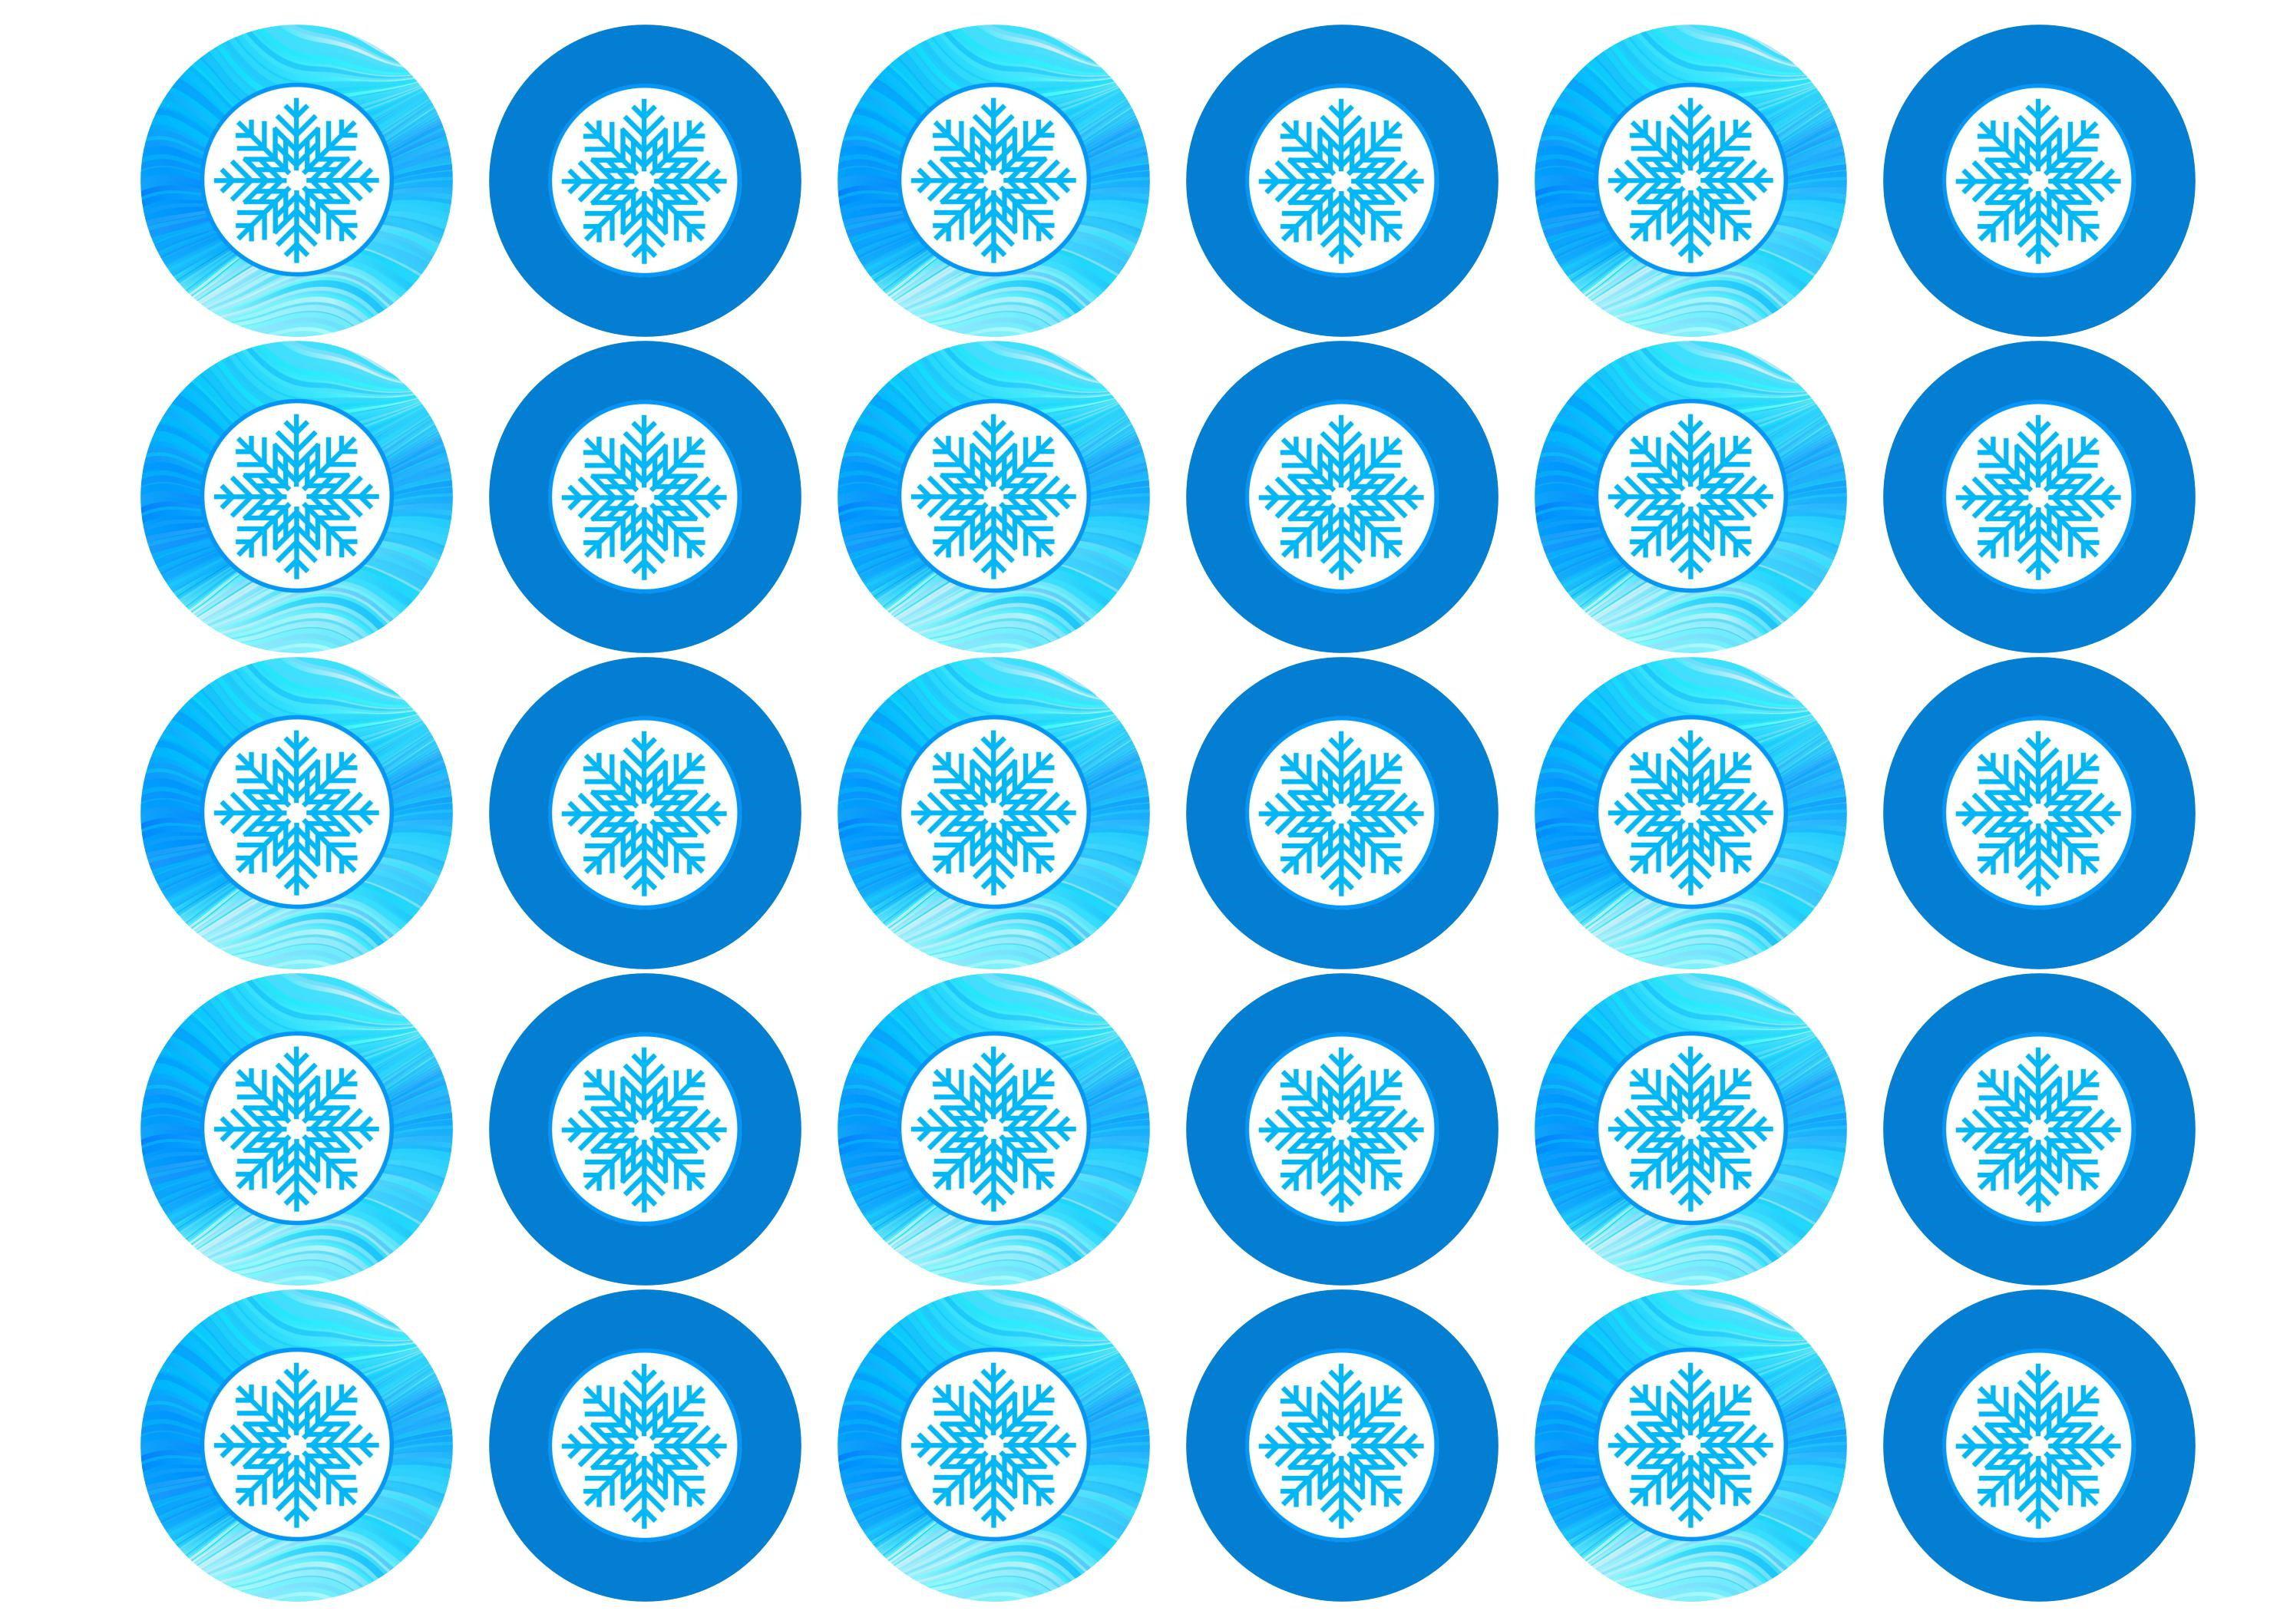 30 edible cupcake toppers with blue snowflakes